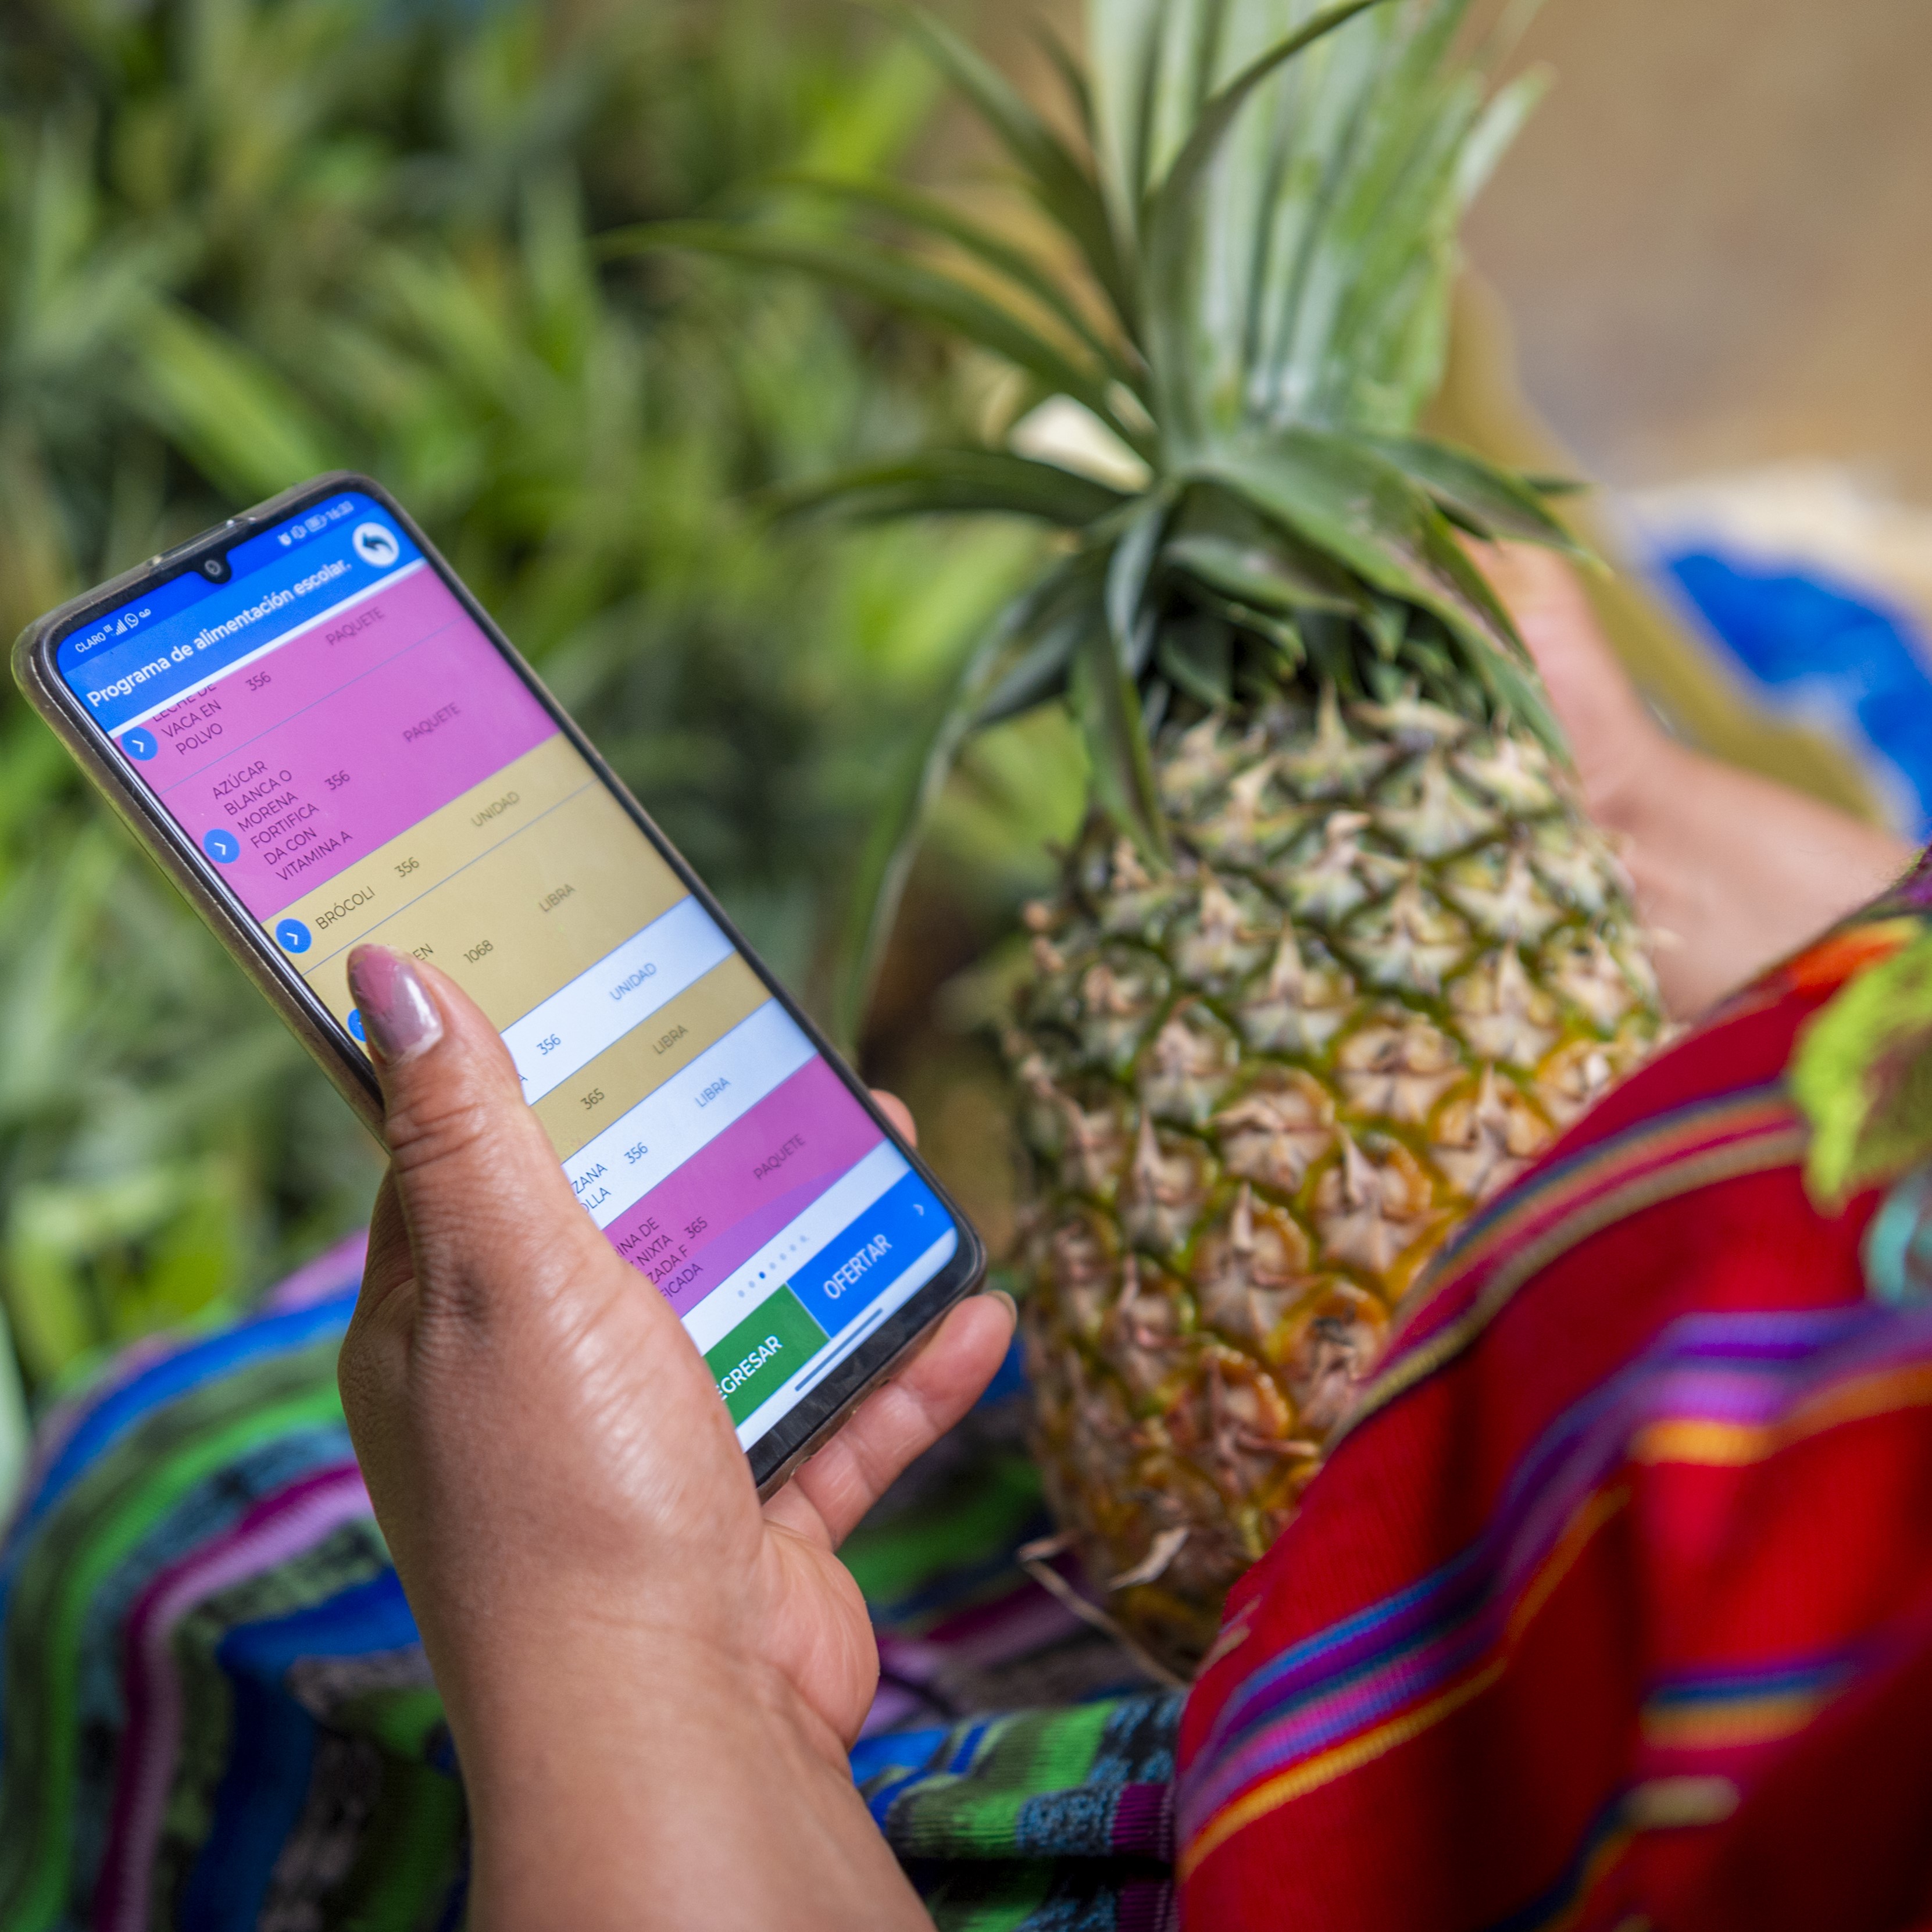 Heydi, a smallholder farmer from the Chimaltenango Department, Guatemala, uses the “WFP School Feeding Management App” (SFMA) to secure and fill orders from local schools.